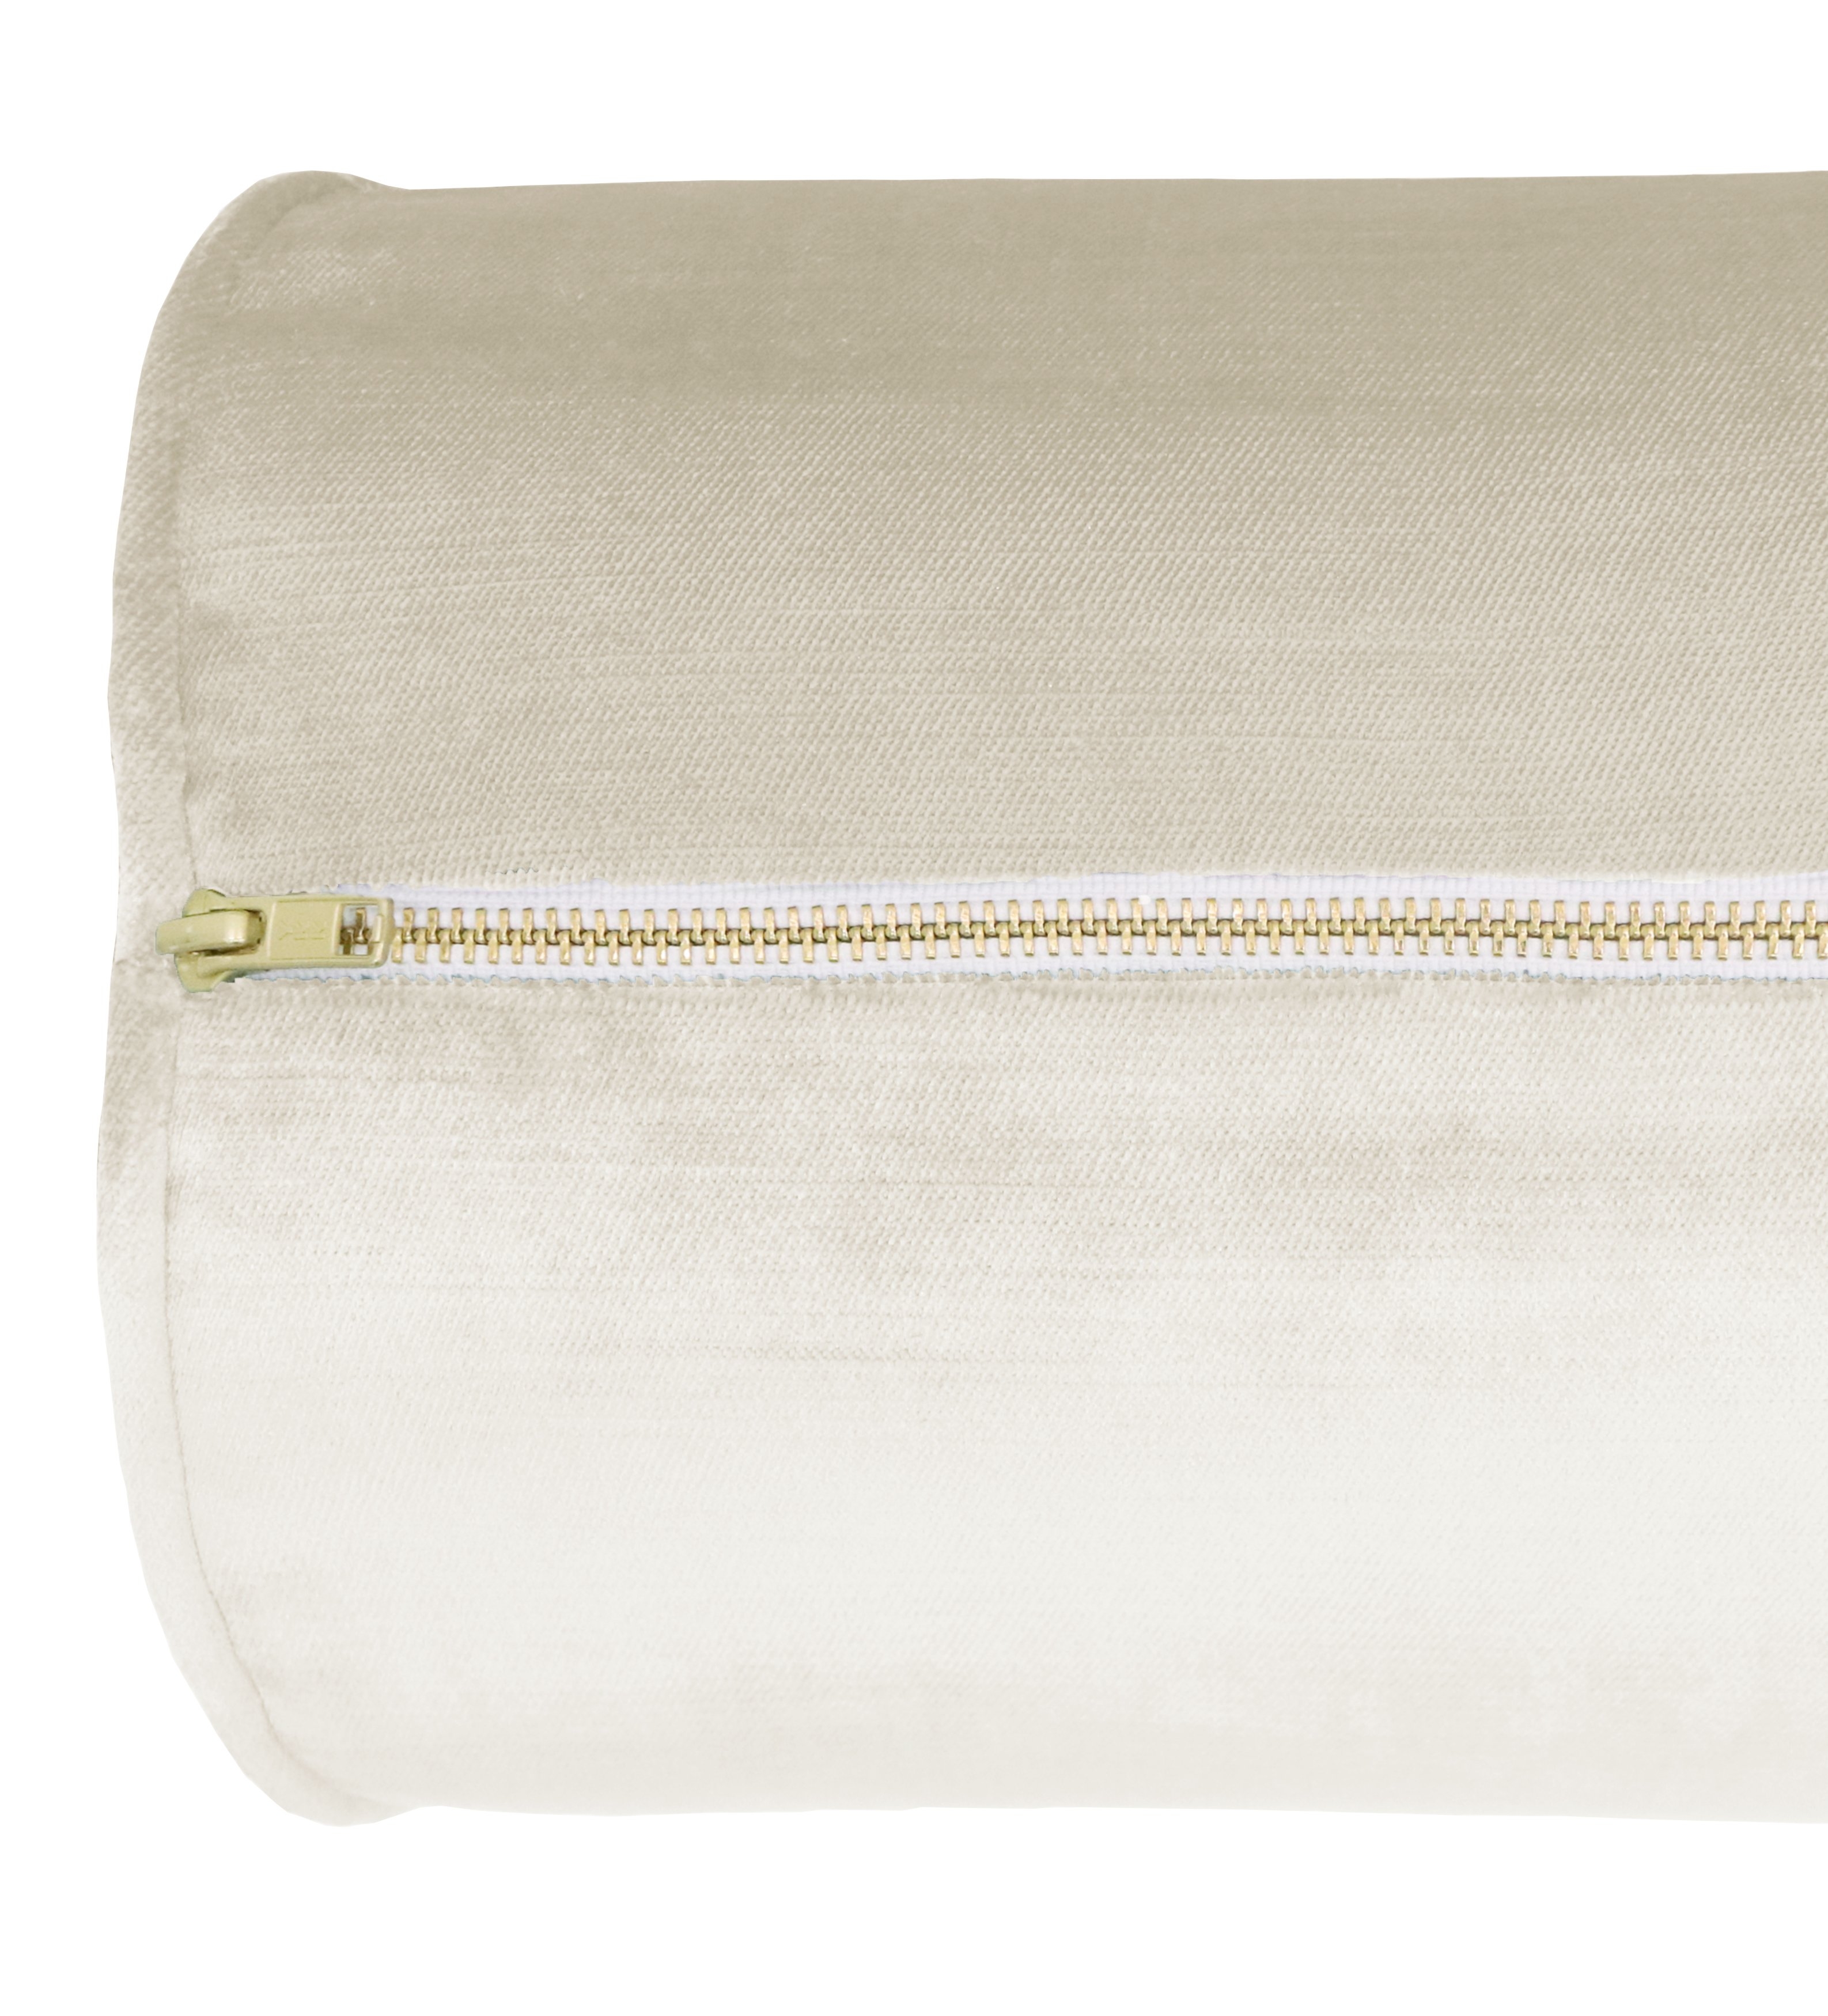 THE BOLSTER :: FAUX SILK VELVET // ALABASTER - TWIN XL // 9" X 30" - Image 2